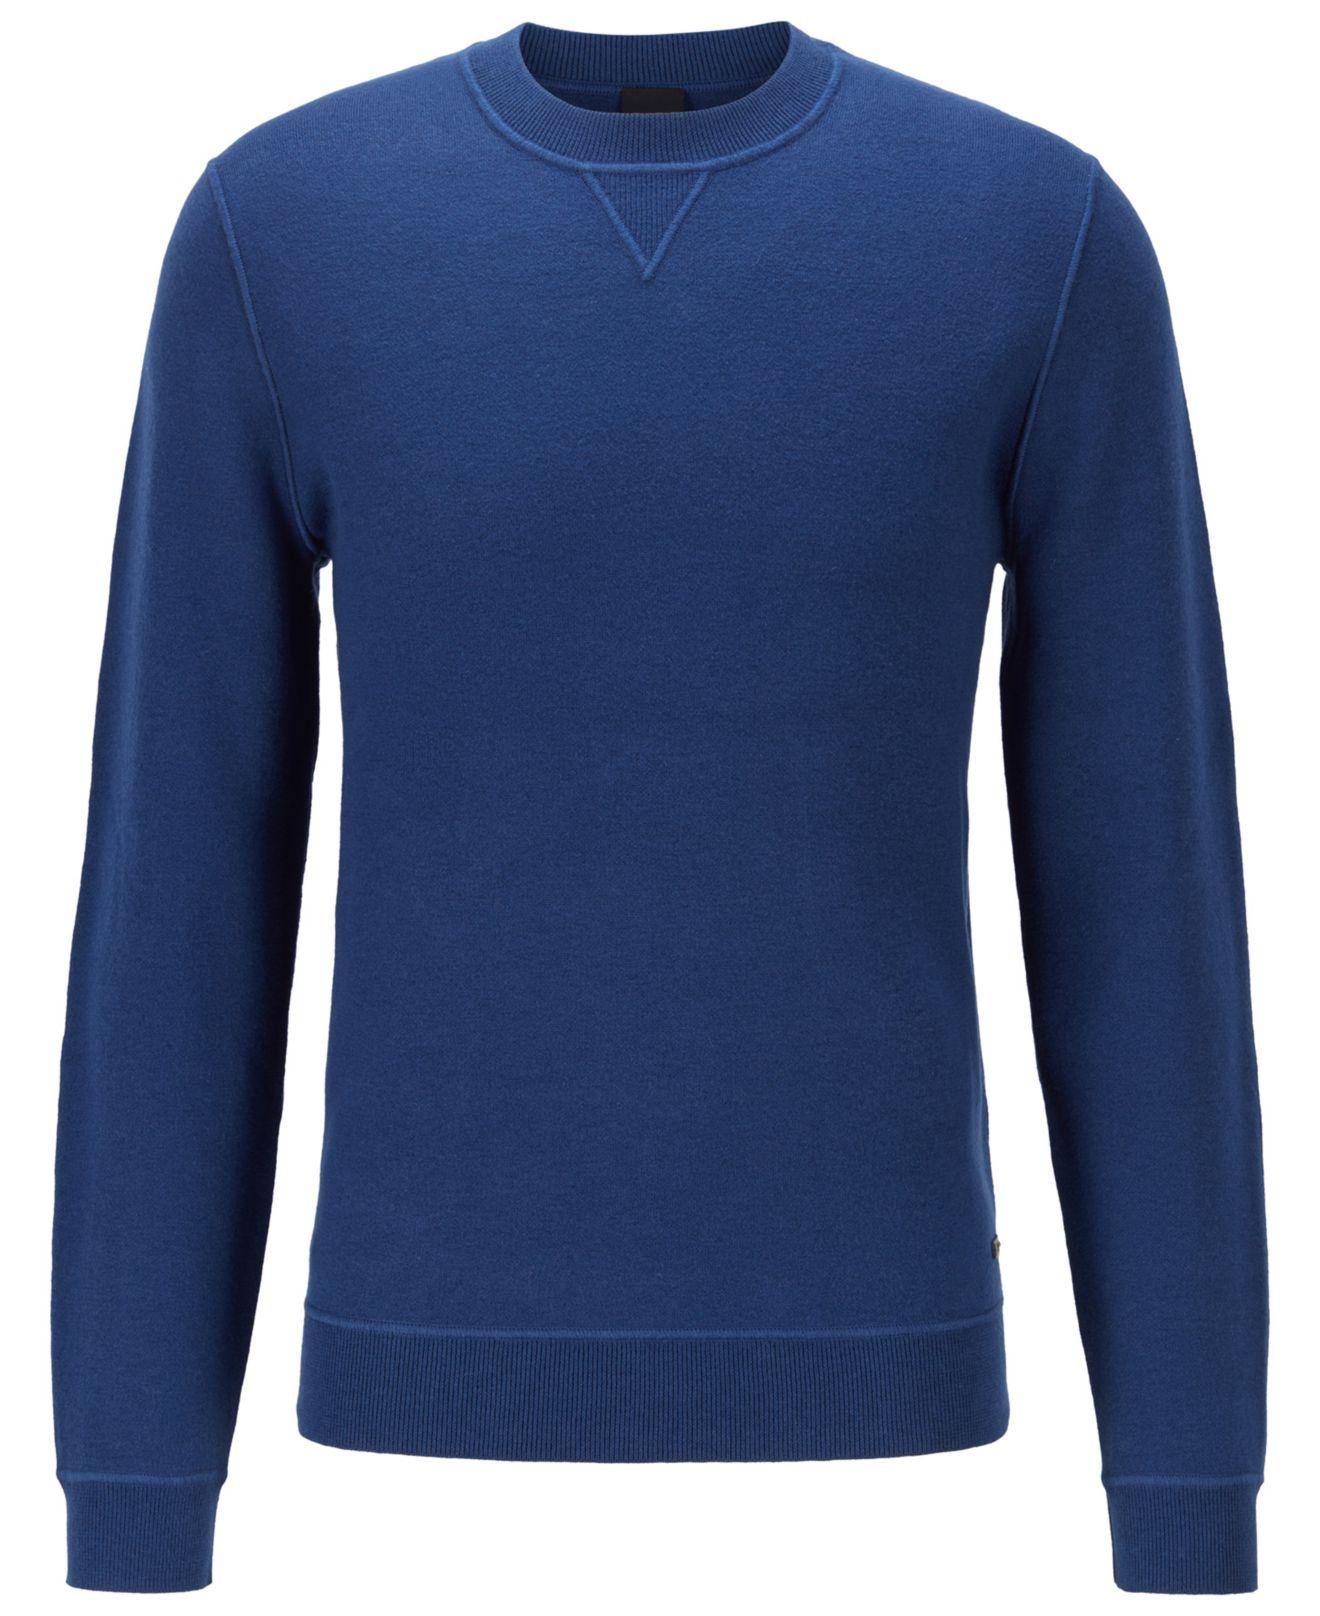 BOSS by Hugo Boss Cotton Mateo Regular-fit Sweater in Navy (Blue) for ...